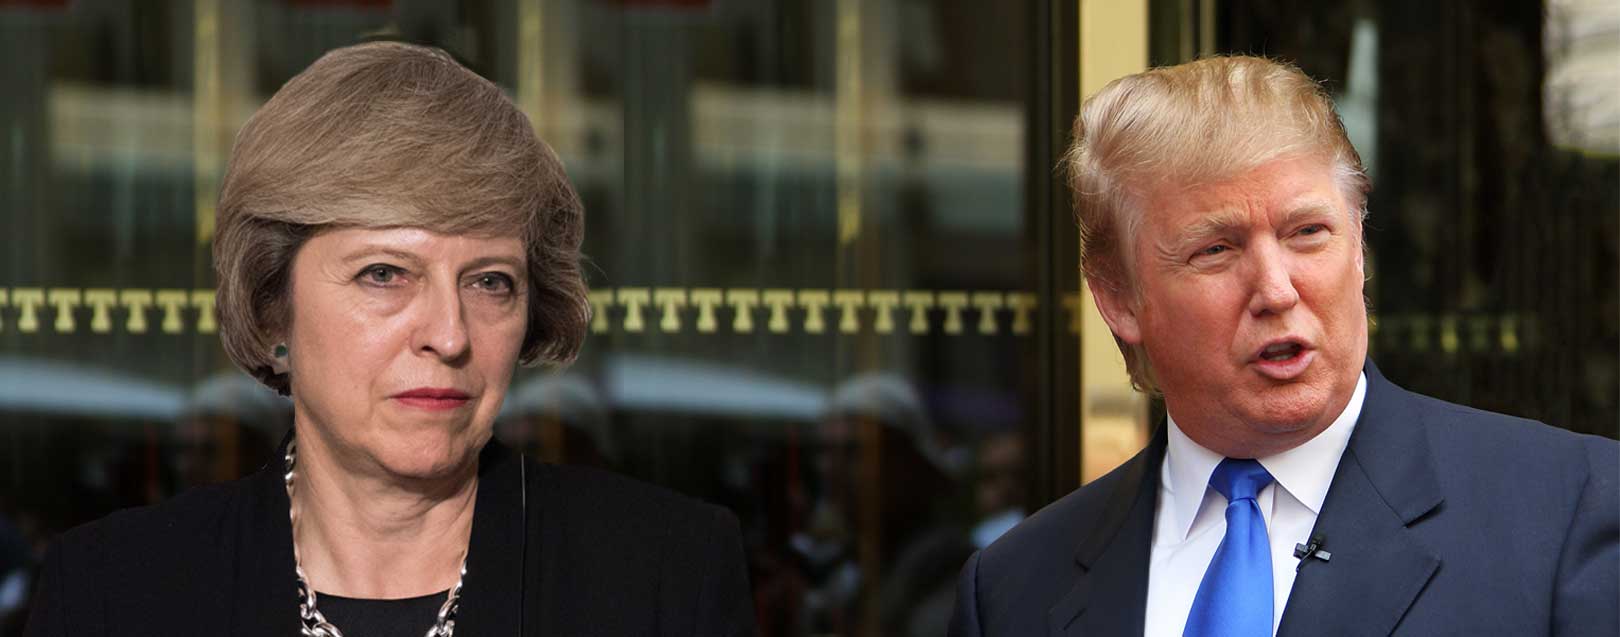 Trump and Theresa agree to increase trade between the two countries